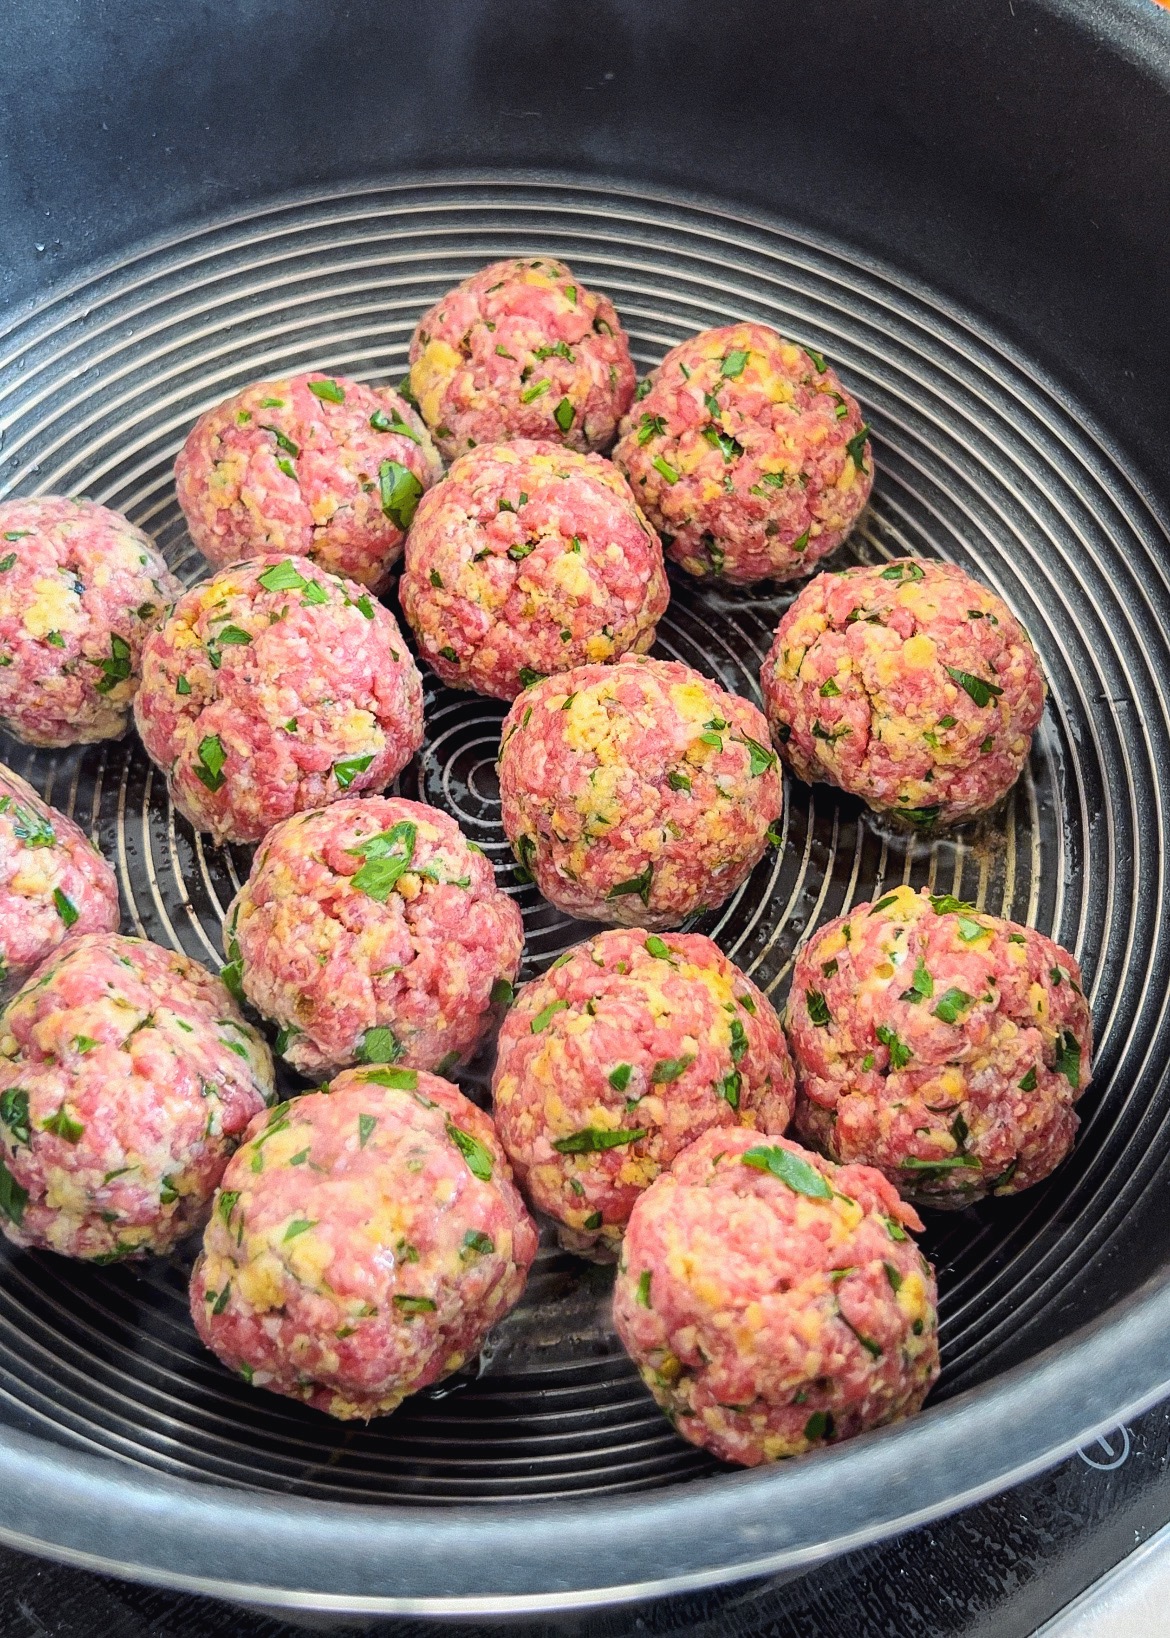 Juicy gluten free meatballs cooking in a pan with herbs